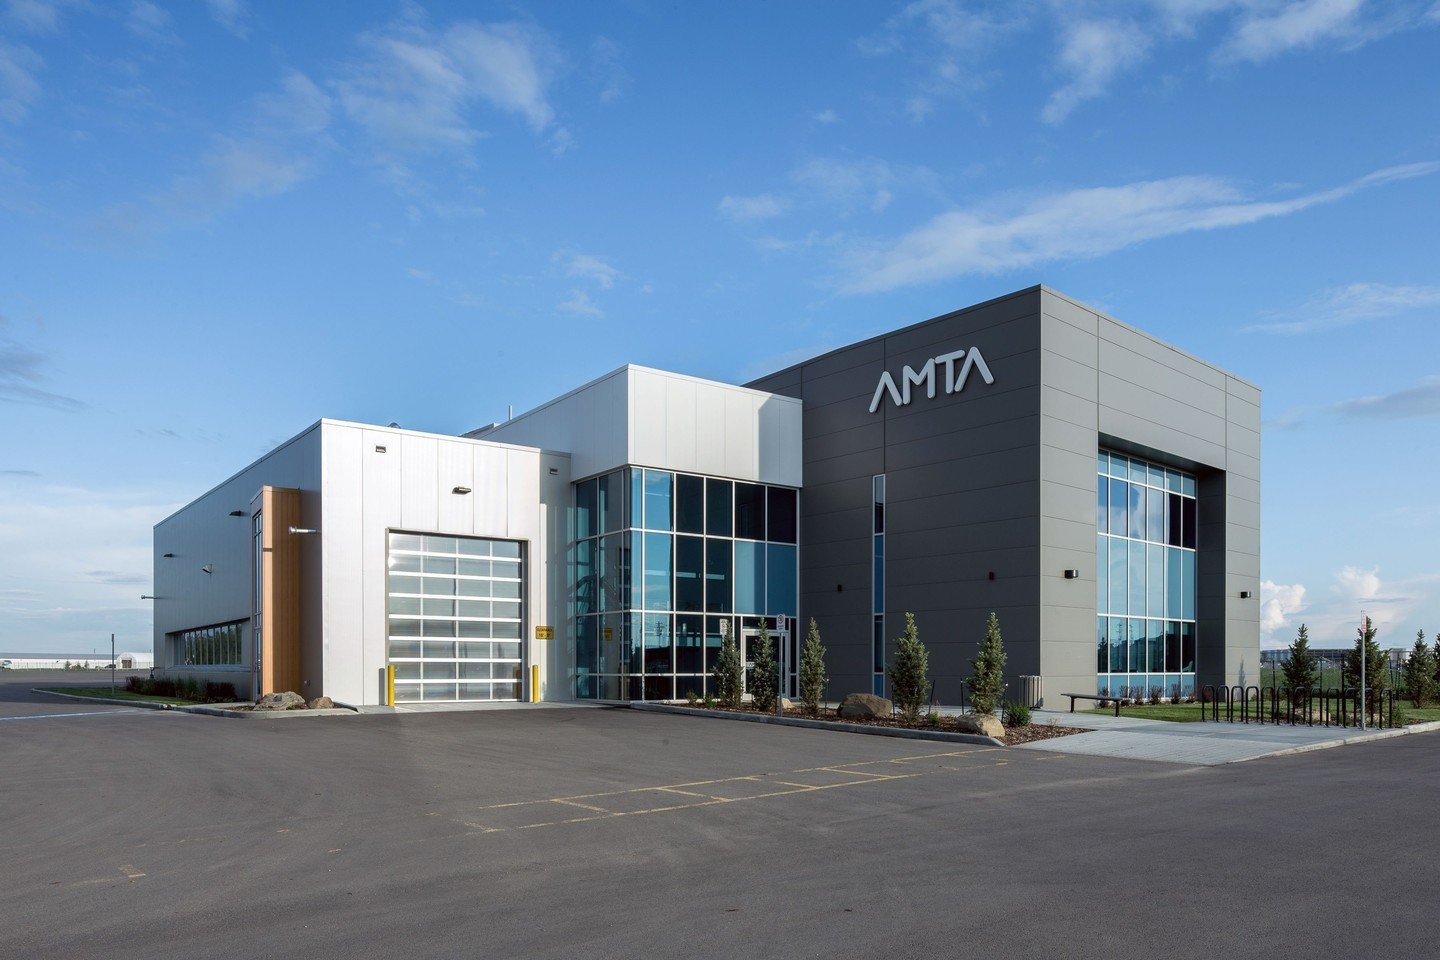 🚚 Project Spotlight: AMTA Training Facility ✨ 

AMTA's transformative facility, inaugurated in October 2018, redefines training for carriers and transportation professionals. Spanning 20,000 sq. ft. with a five-acre closed track, it proudly holds LE